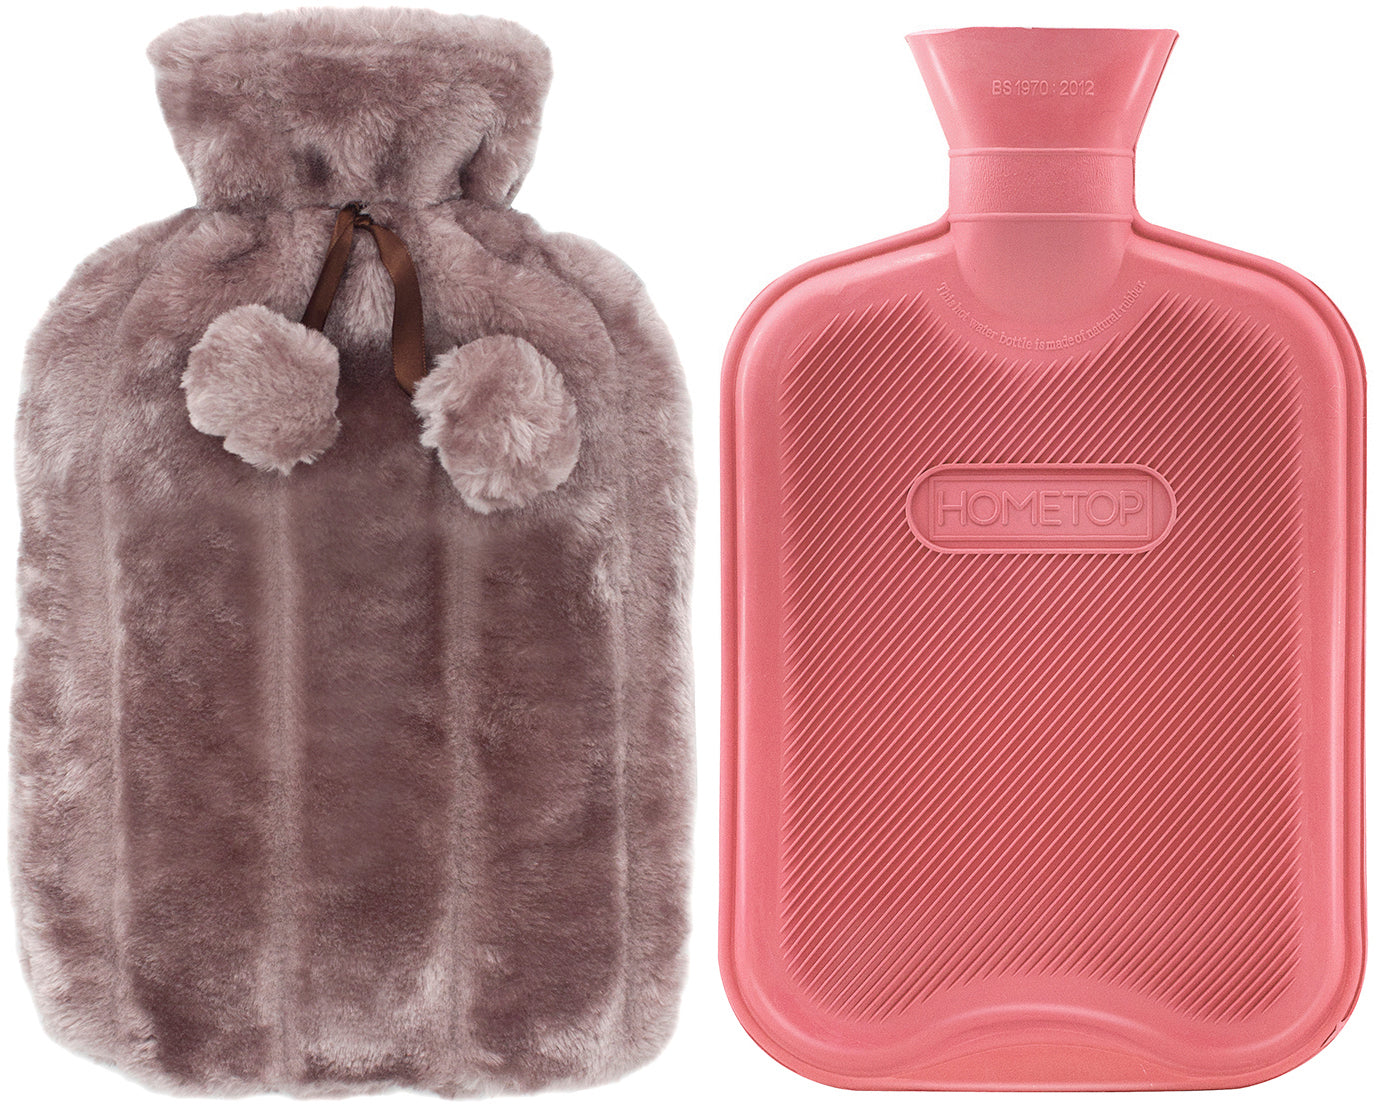 HomeTop Premium Classic Rubber Hot Water Bottle and Luxurious Faux Fur Plush Fleece Cover